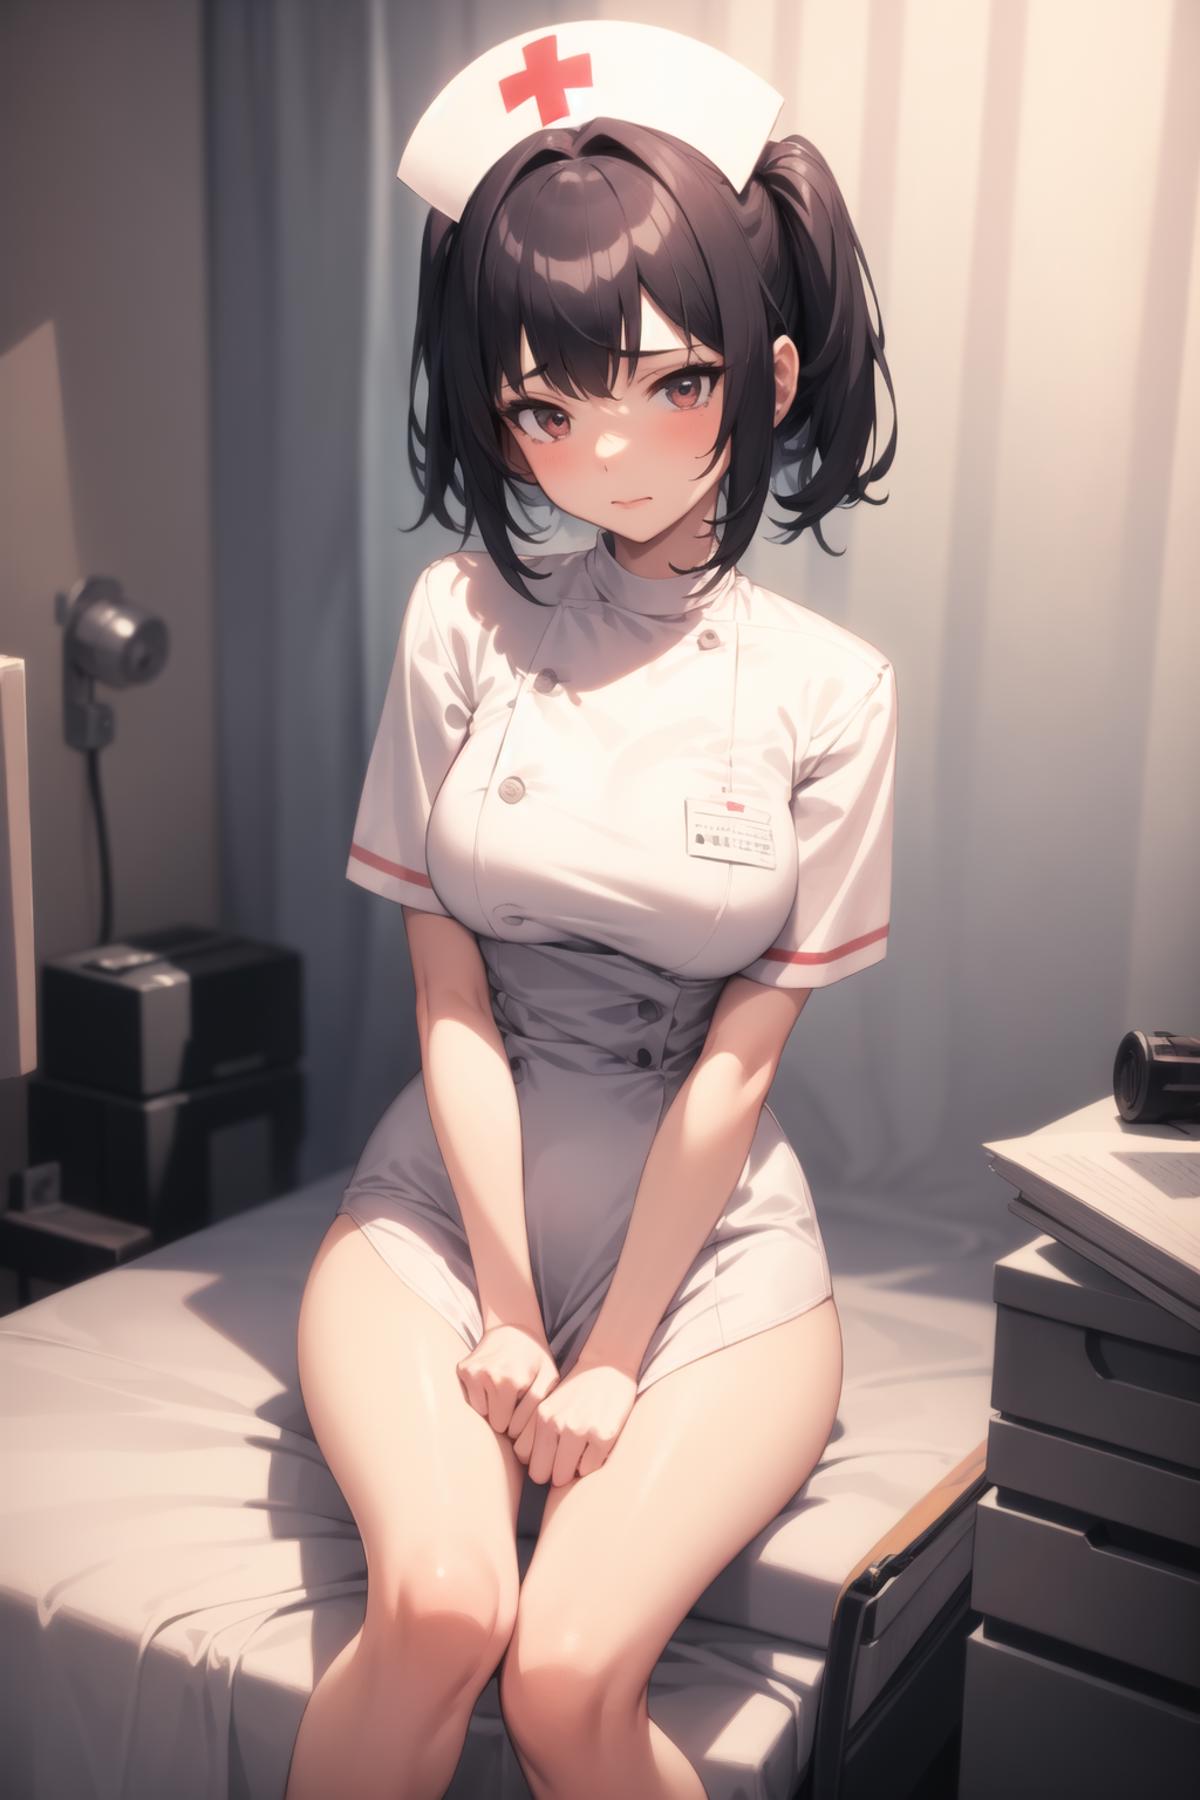 A cartoonish image of a woman in a nurse's uniform sitting on a bed.